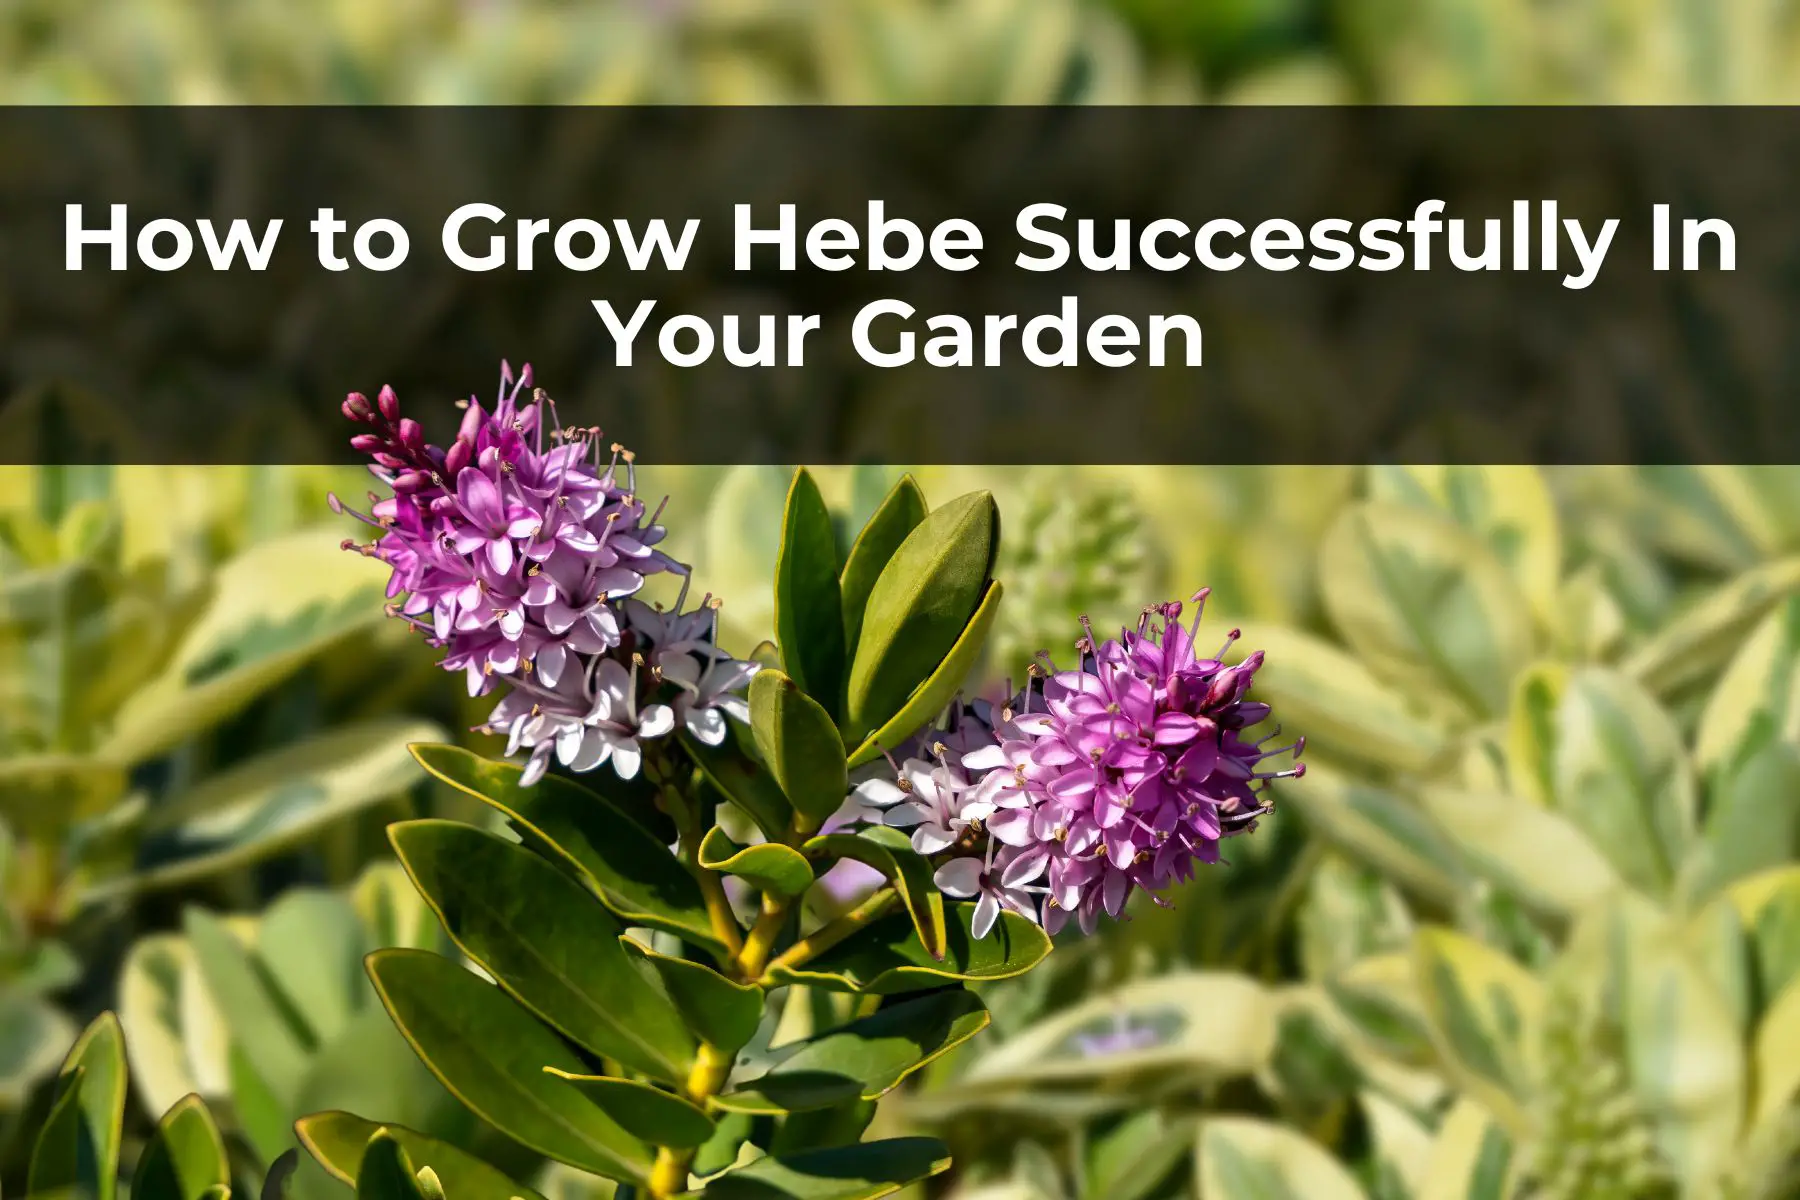 How to Grow Hebe Successfully In Your Garden